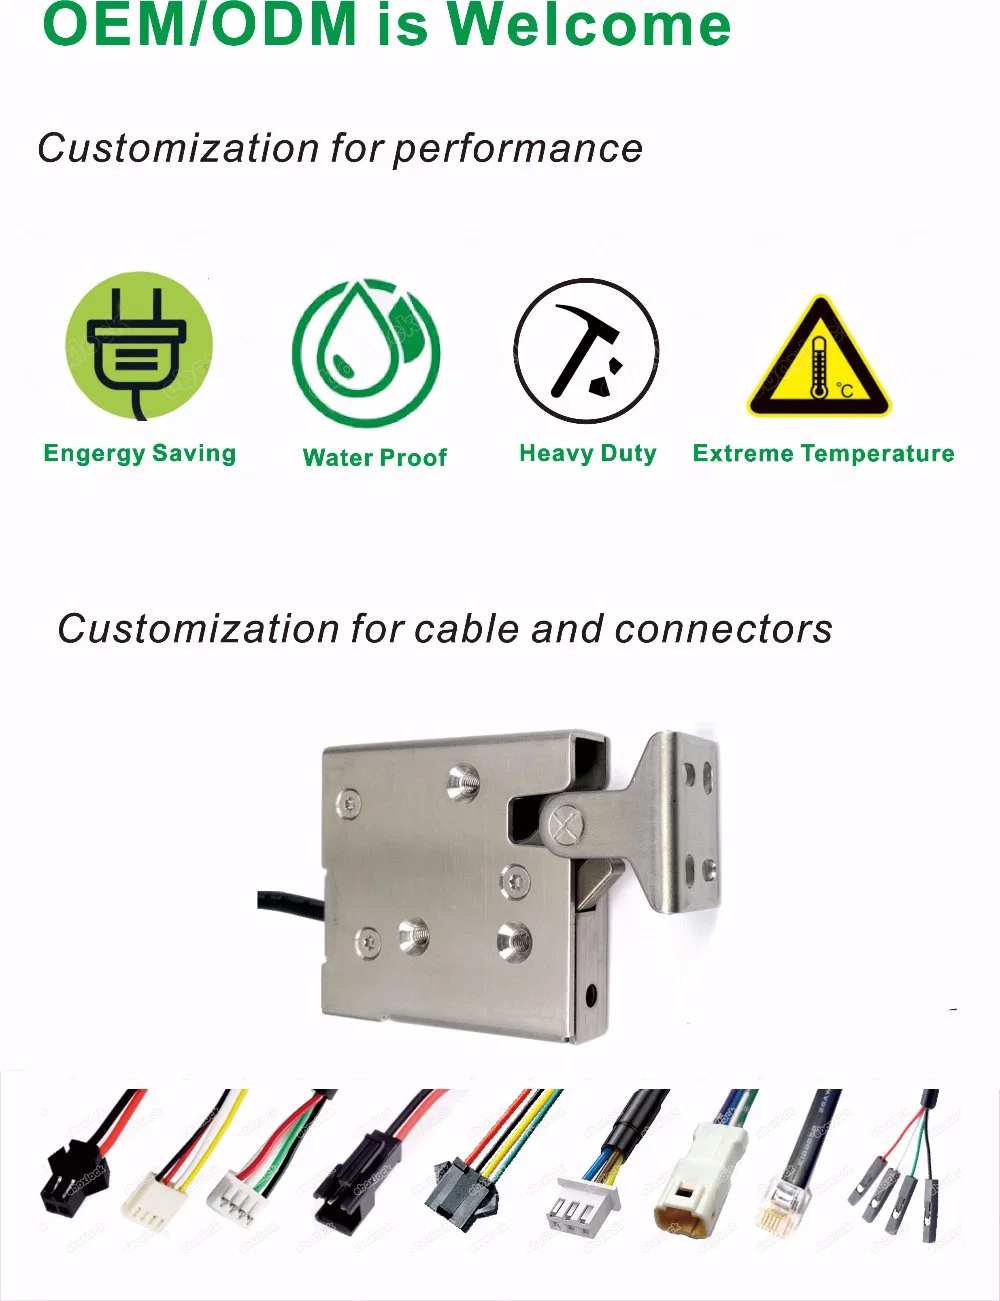 Electronic Rotary Latch for Safe and Vending Machine